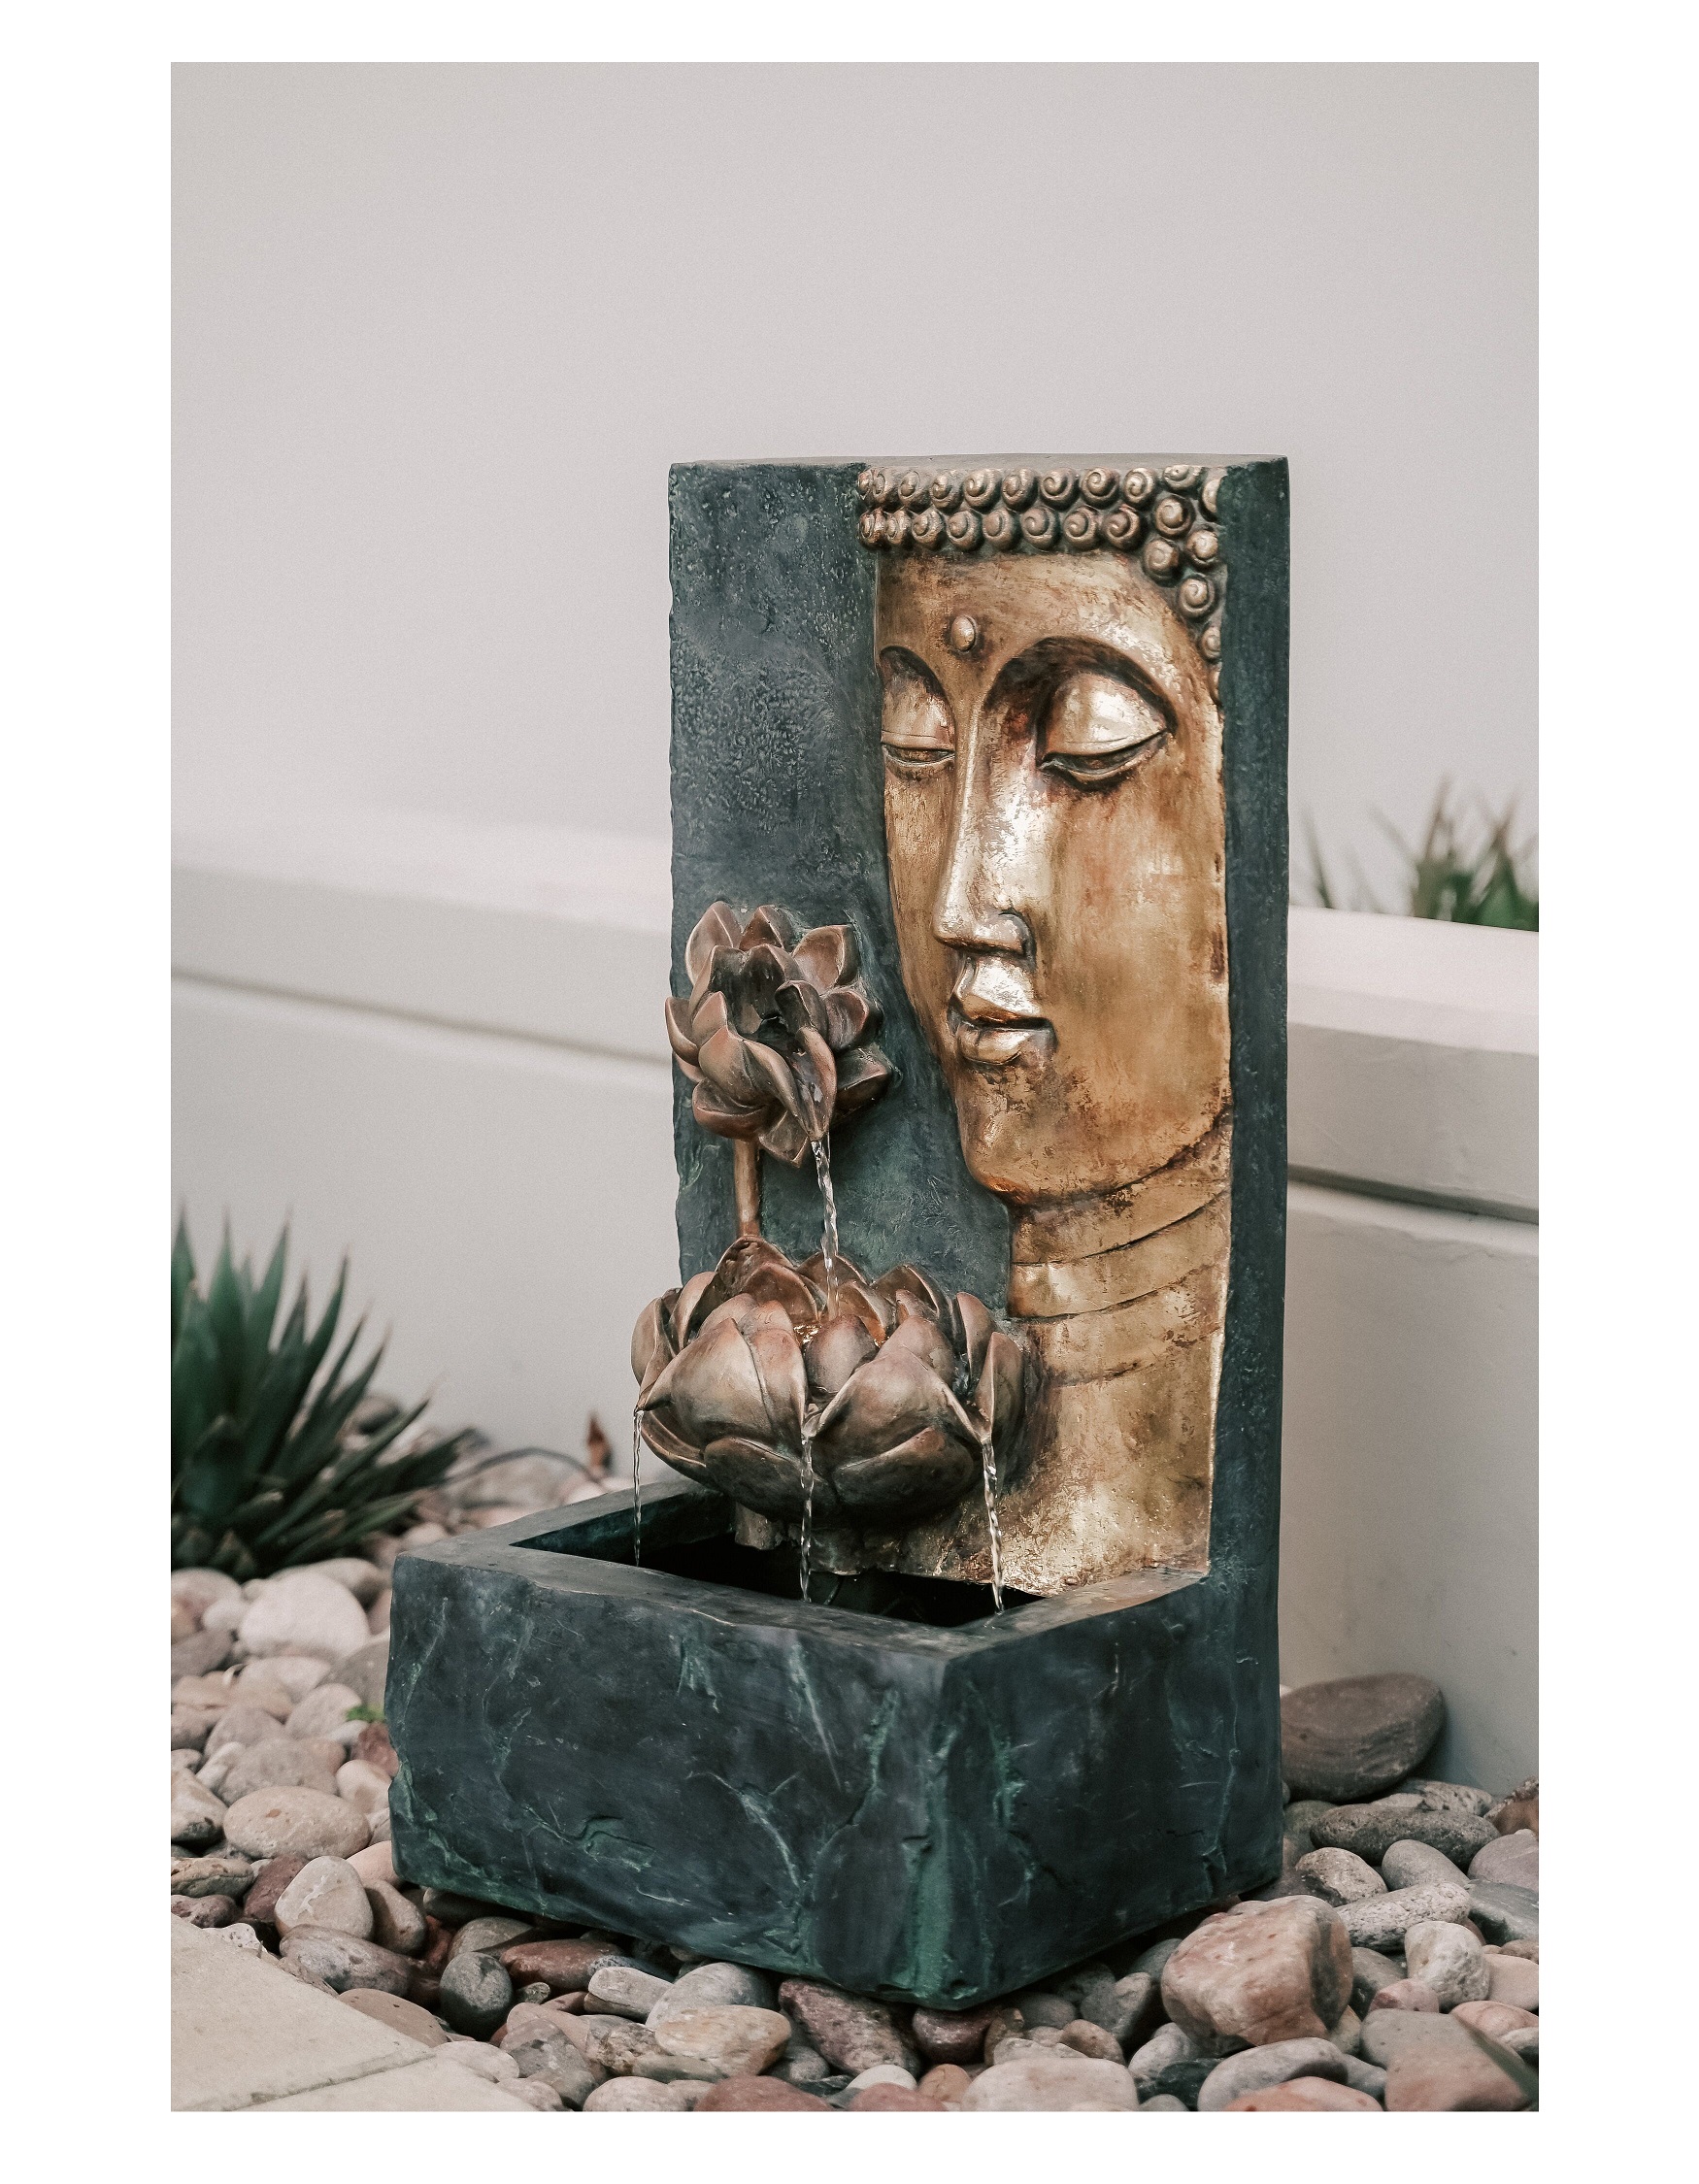 Create a calming oasis with our Buddha fountain collection - meditating Buddhas, cascading waterfalls, lotus designs & more for indoor relaxing décor. Shop Now!